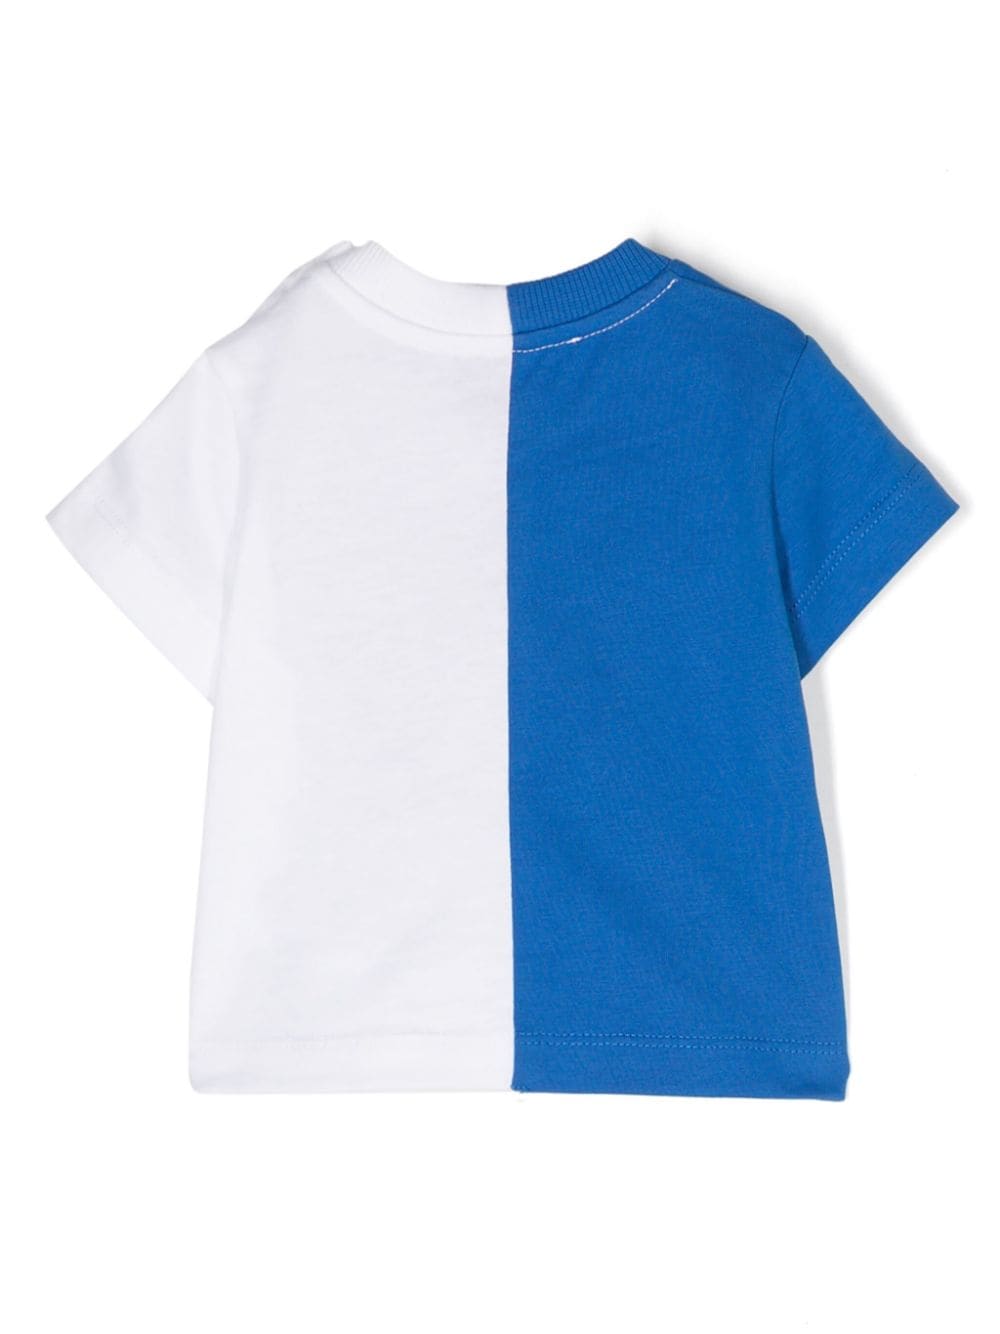 White and blue baby t-shirt with logo